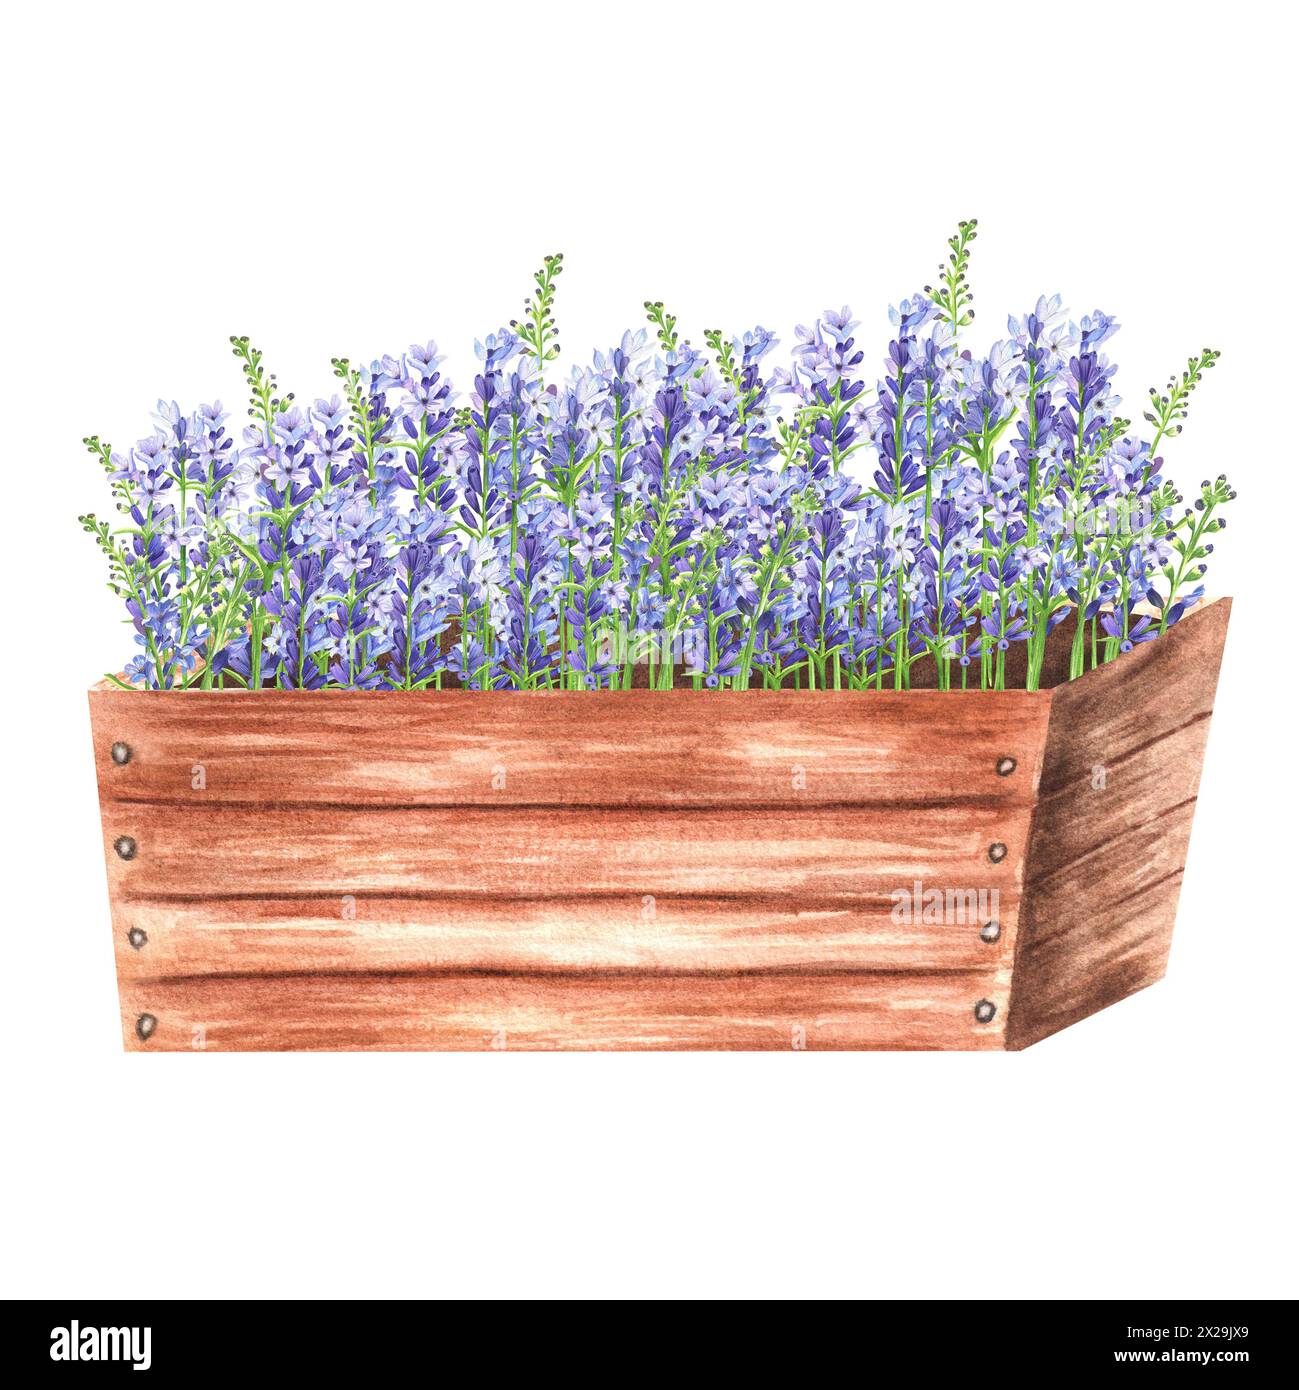 Hand-drawn watercolor illustration. Potted lavender with garden in a big wooden crate. A piece or Provence Stock Photo